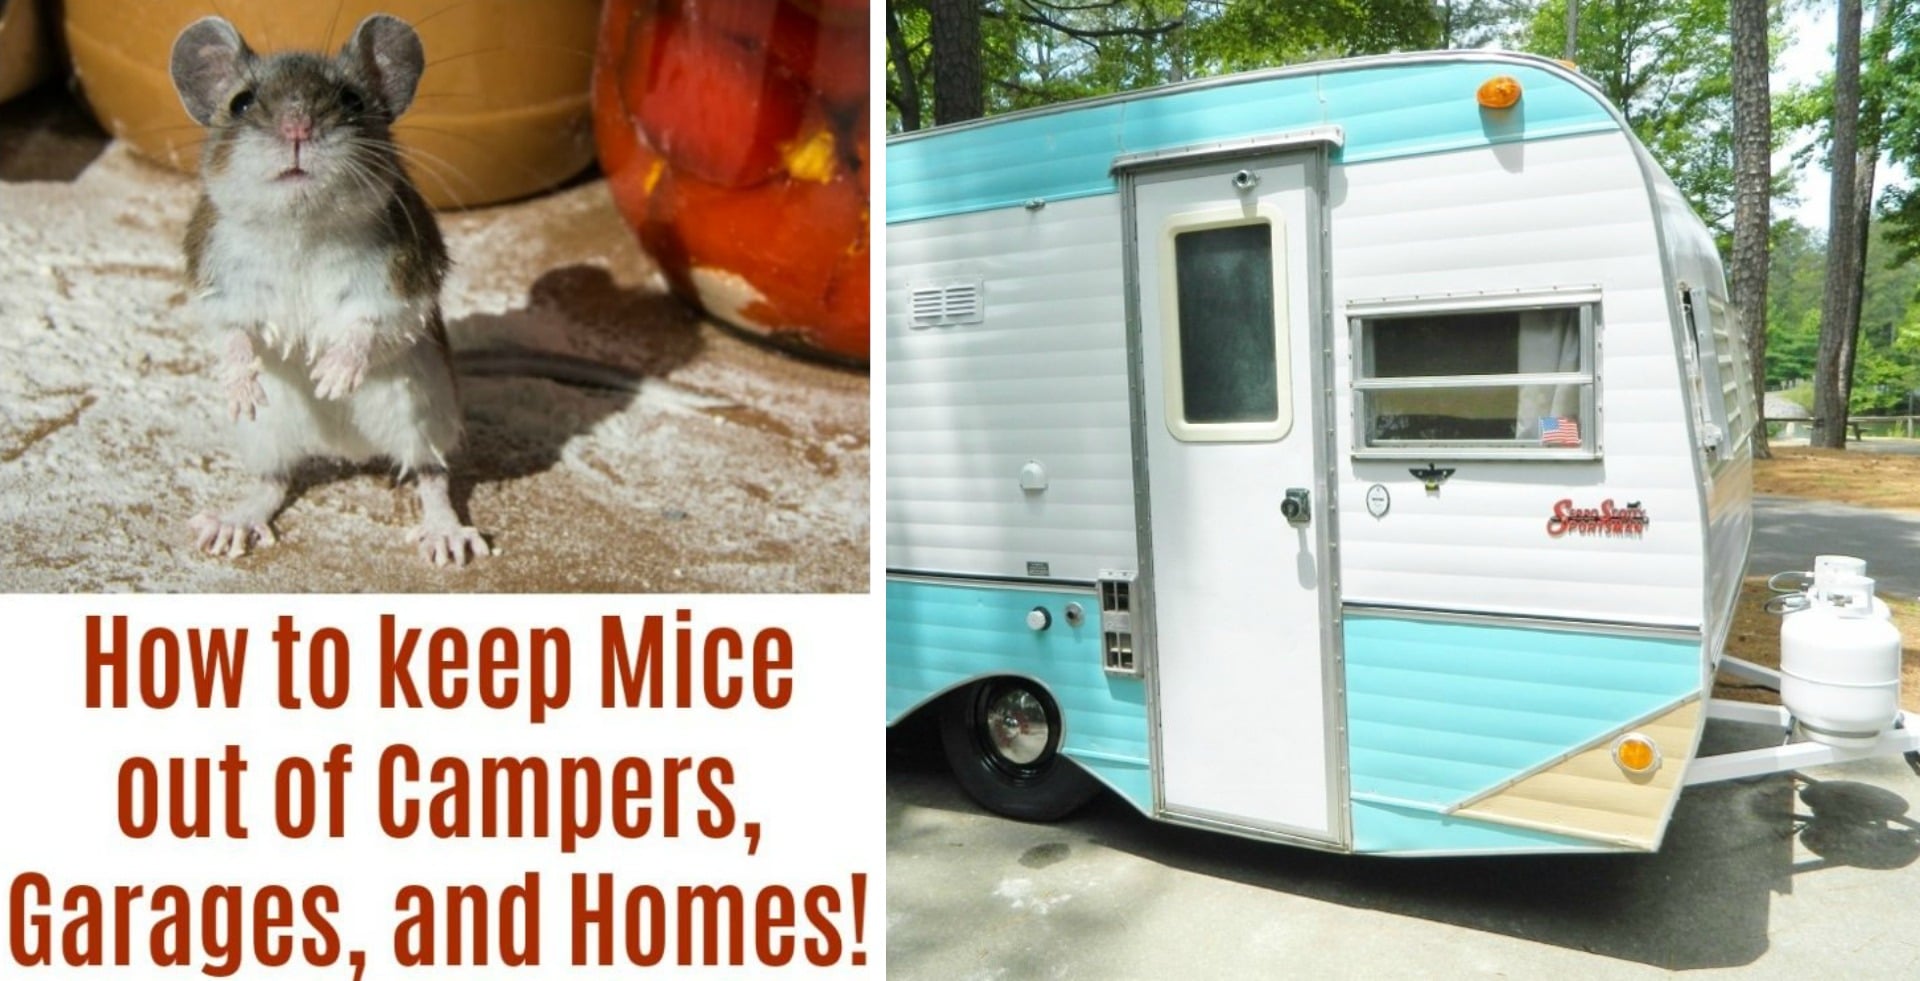 How to keep Mice out of Campers - Kitchen Fun With My 3 Sons